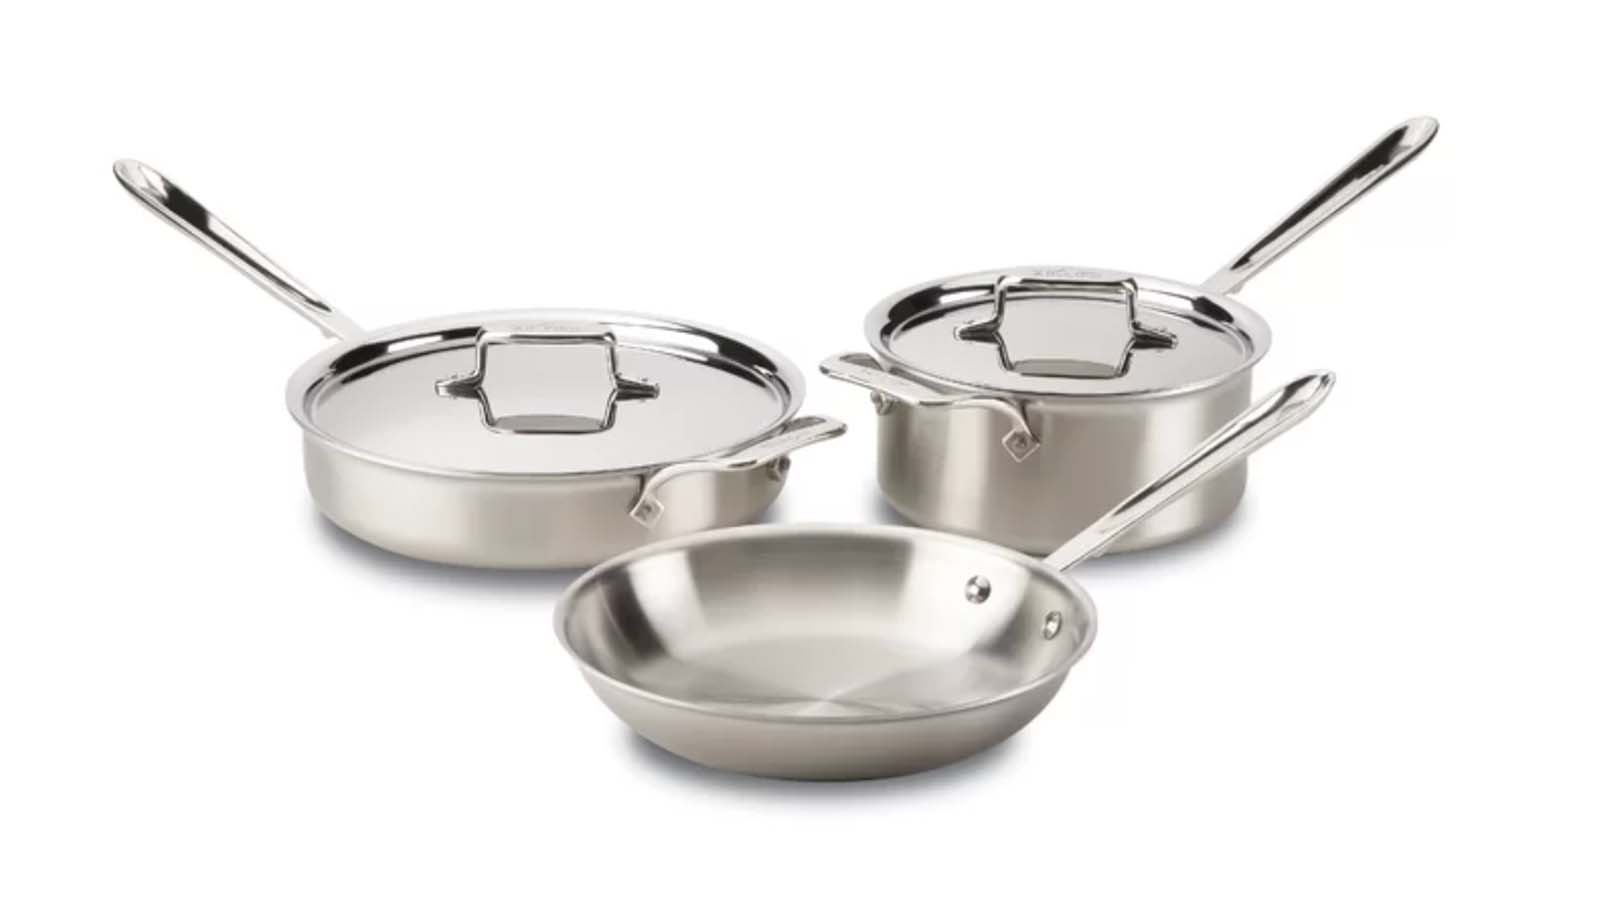 Giveaway: 10 Sets of NEW PW Cookware (Winners!)